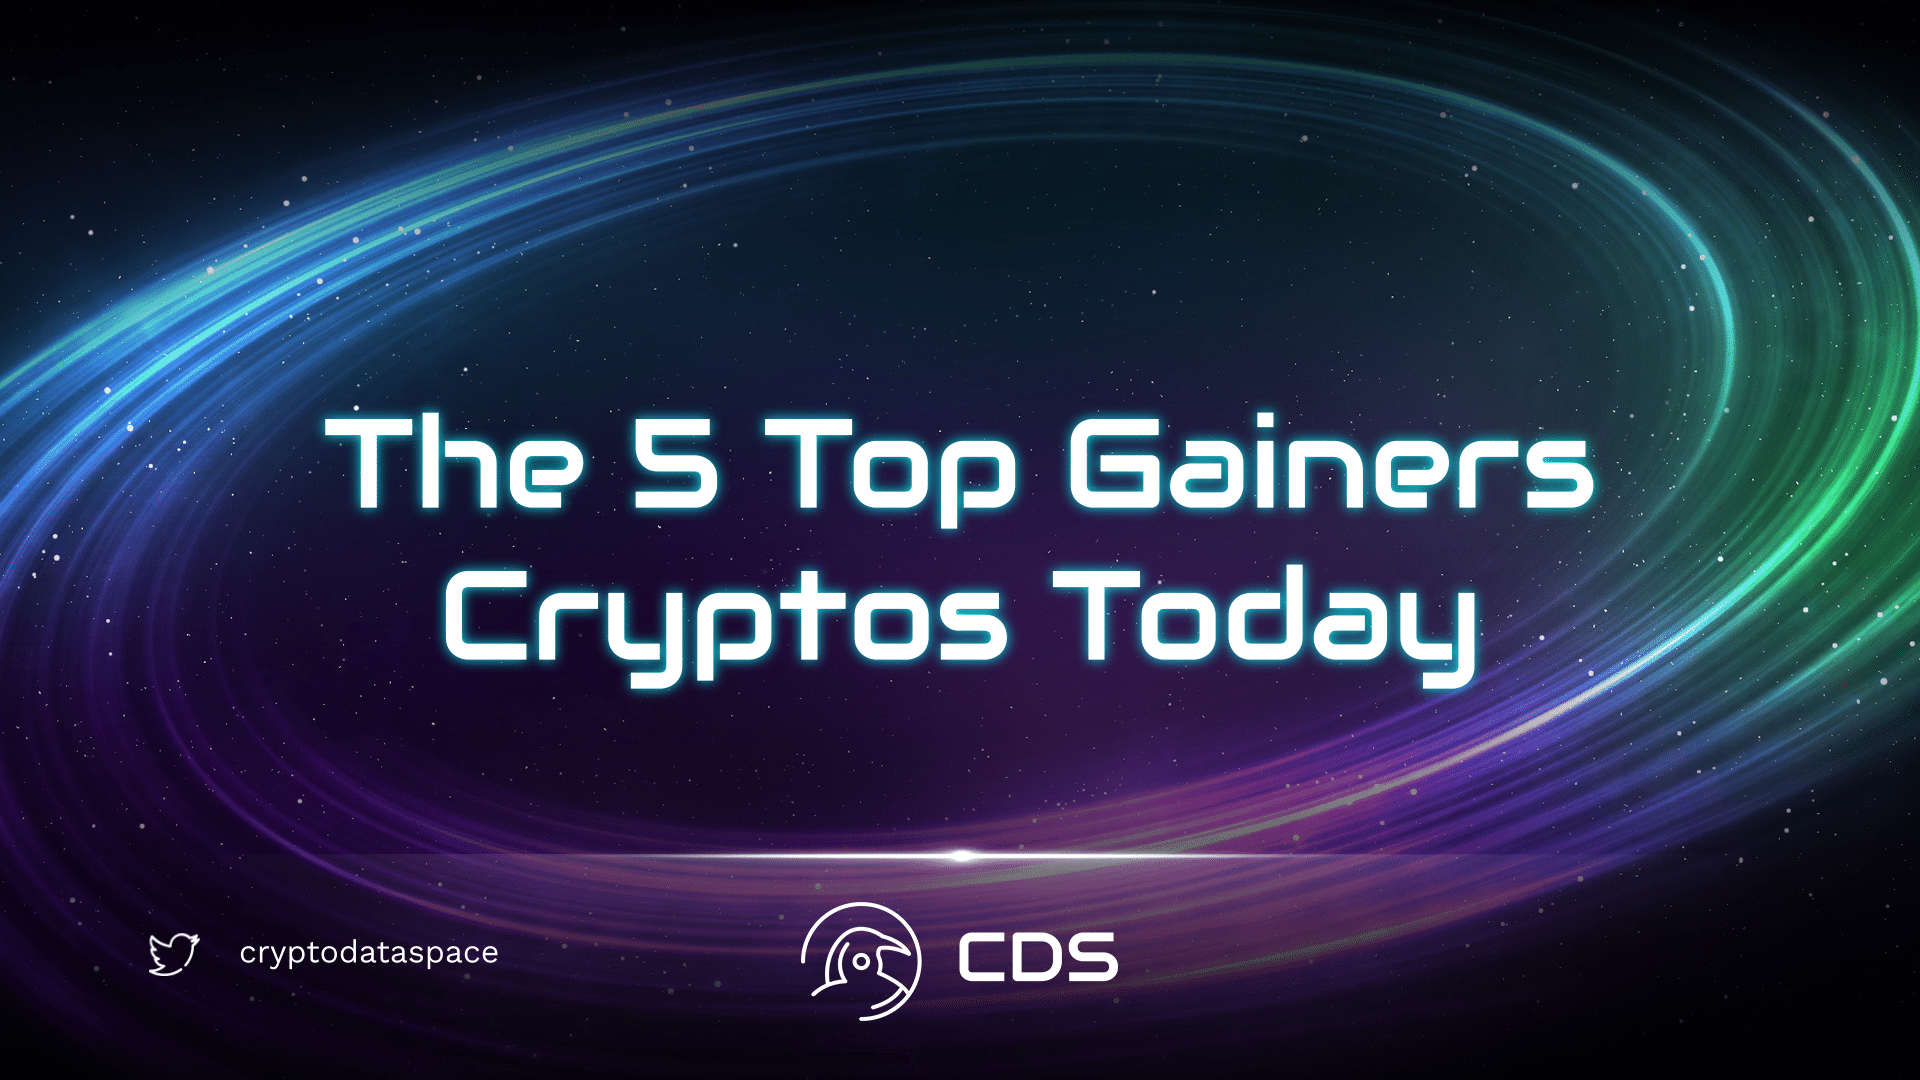 The 5 Top Gainers Cryptos Today